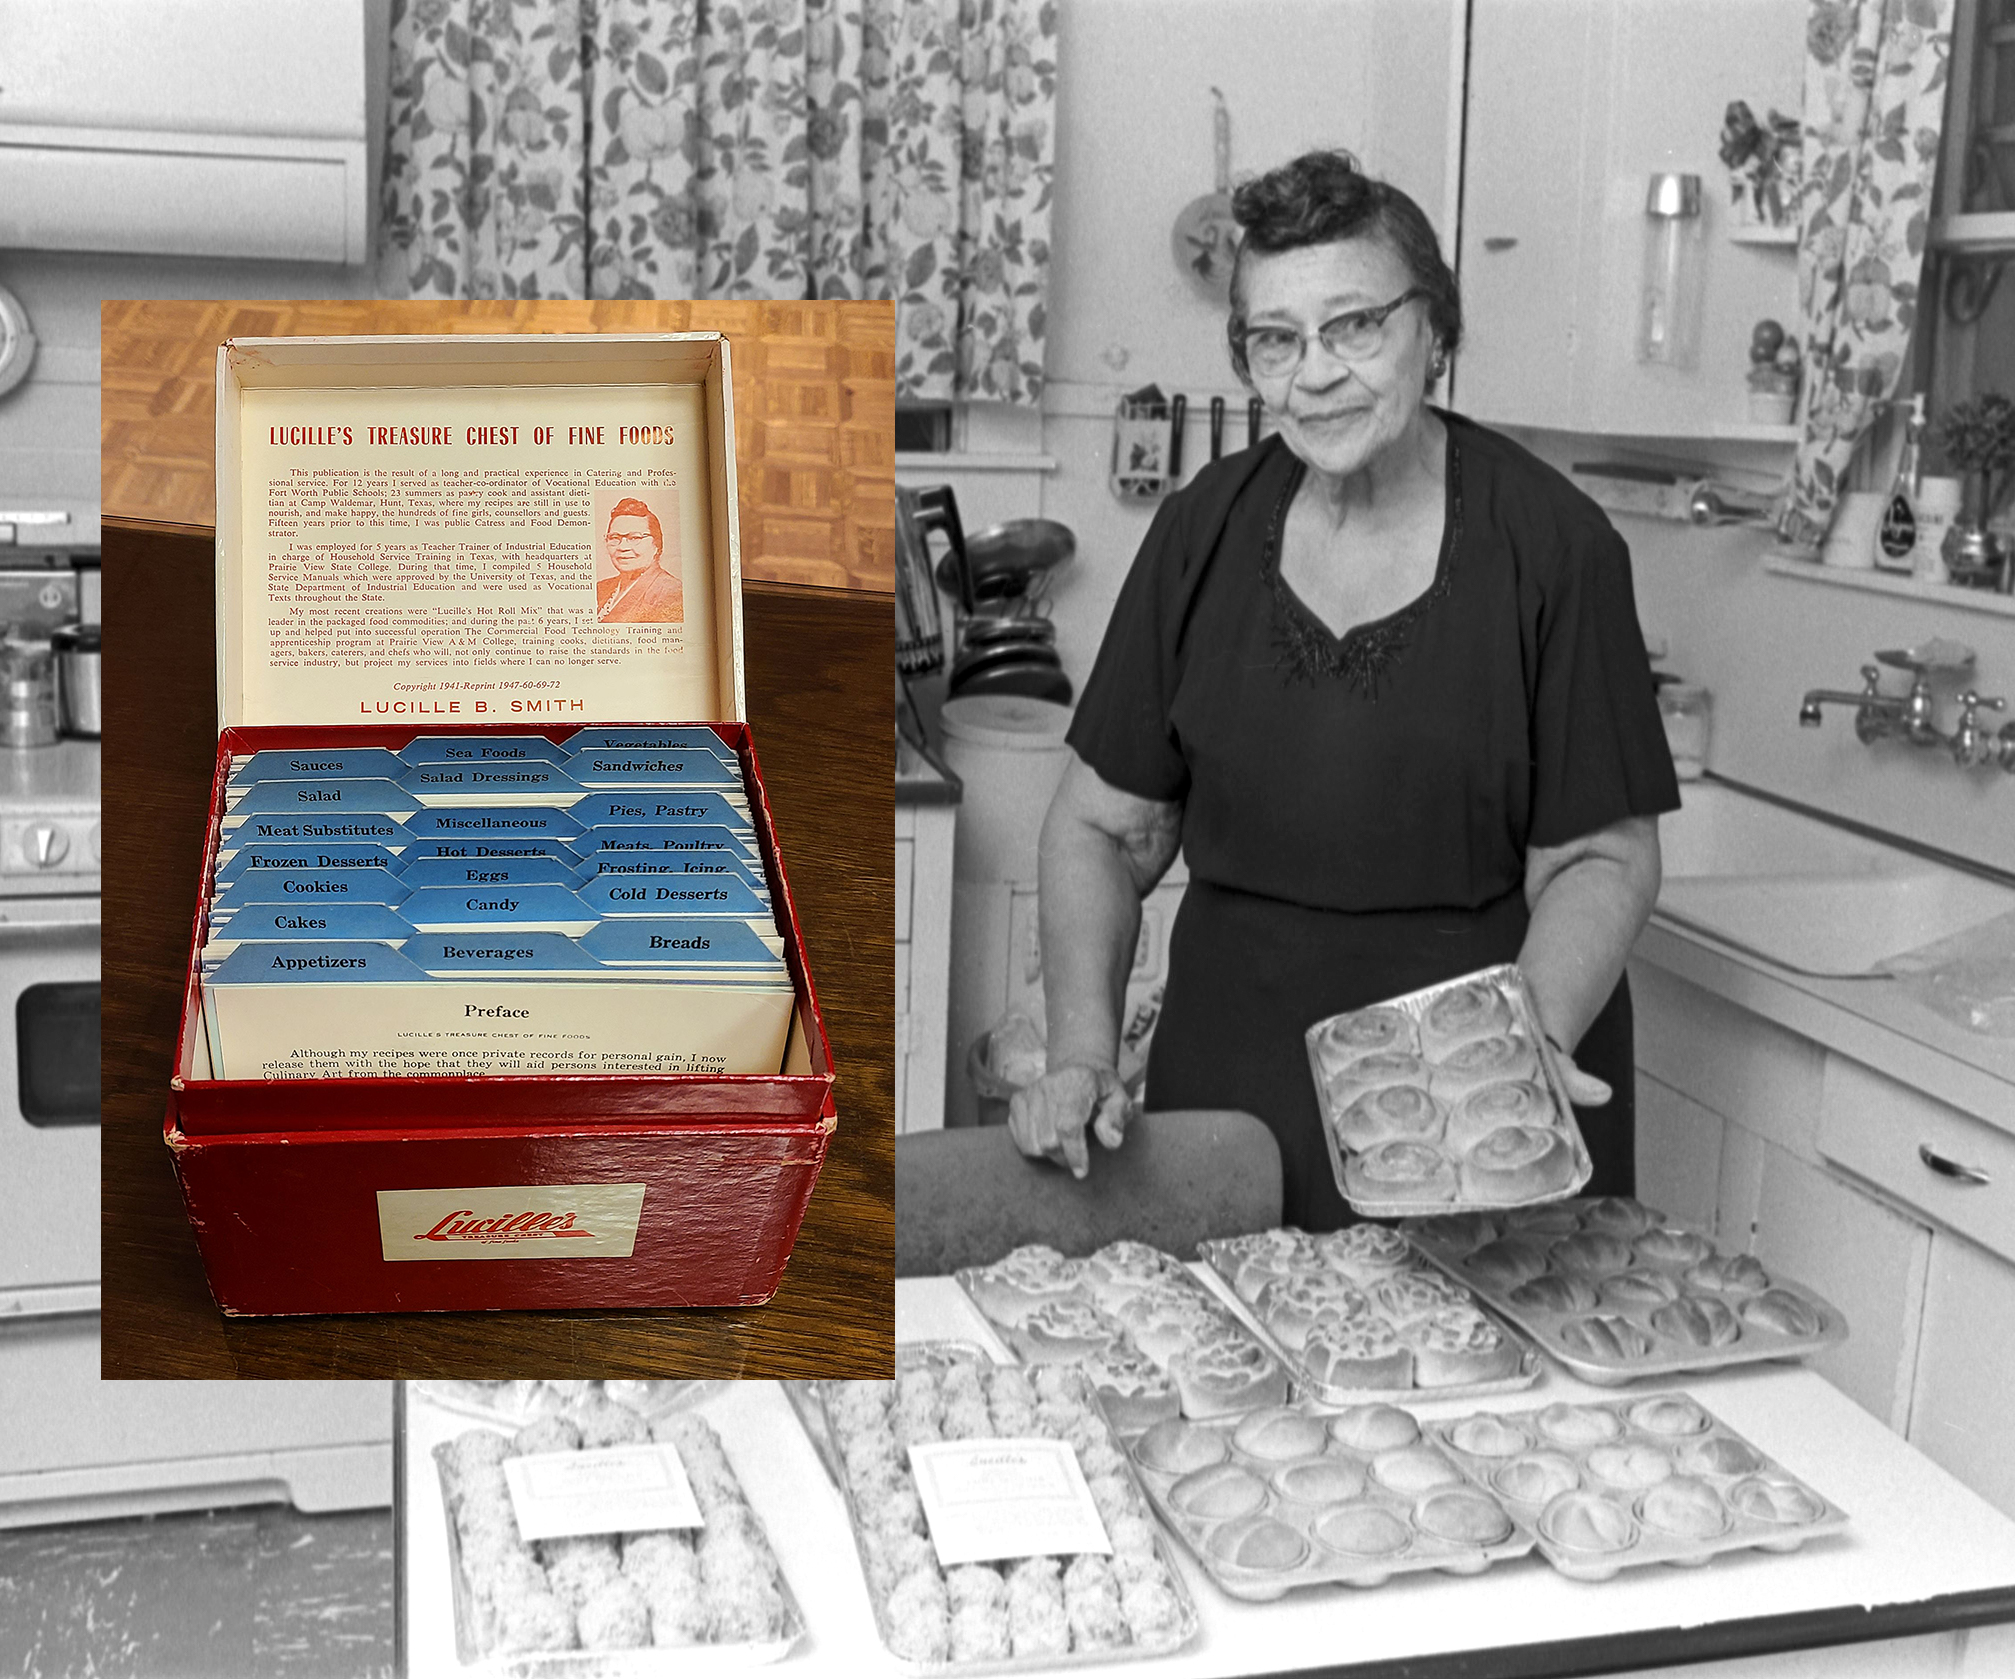 Photograph of a recipe box superimposed over a black and white photograph of Lucille Bishop Smith.